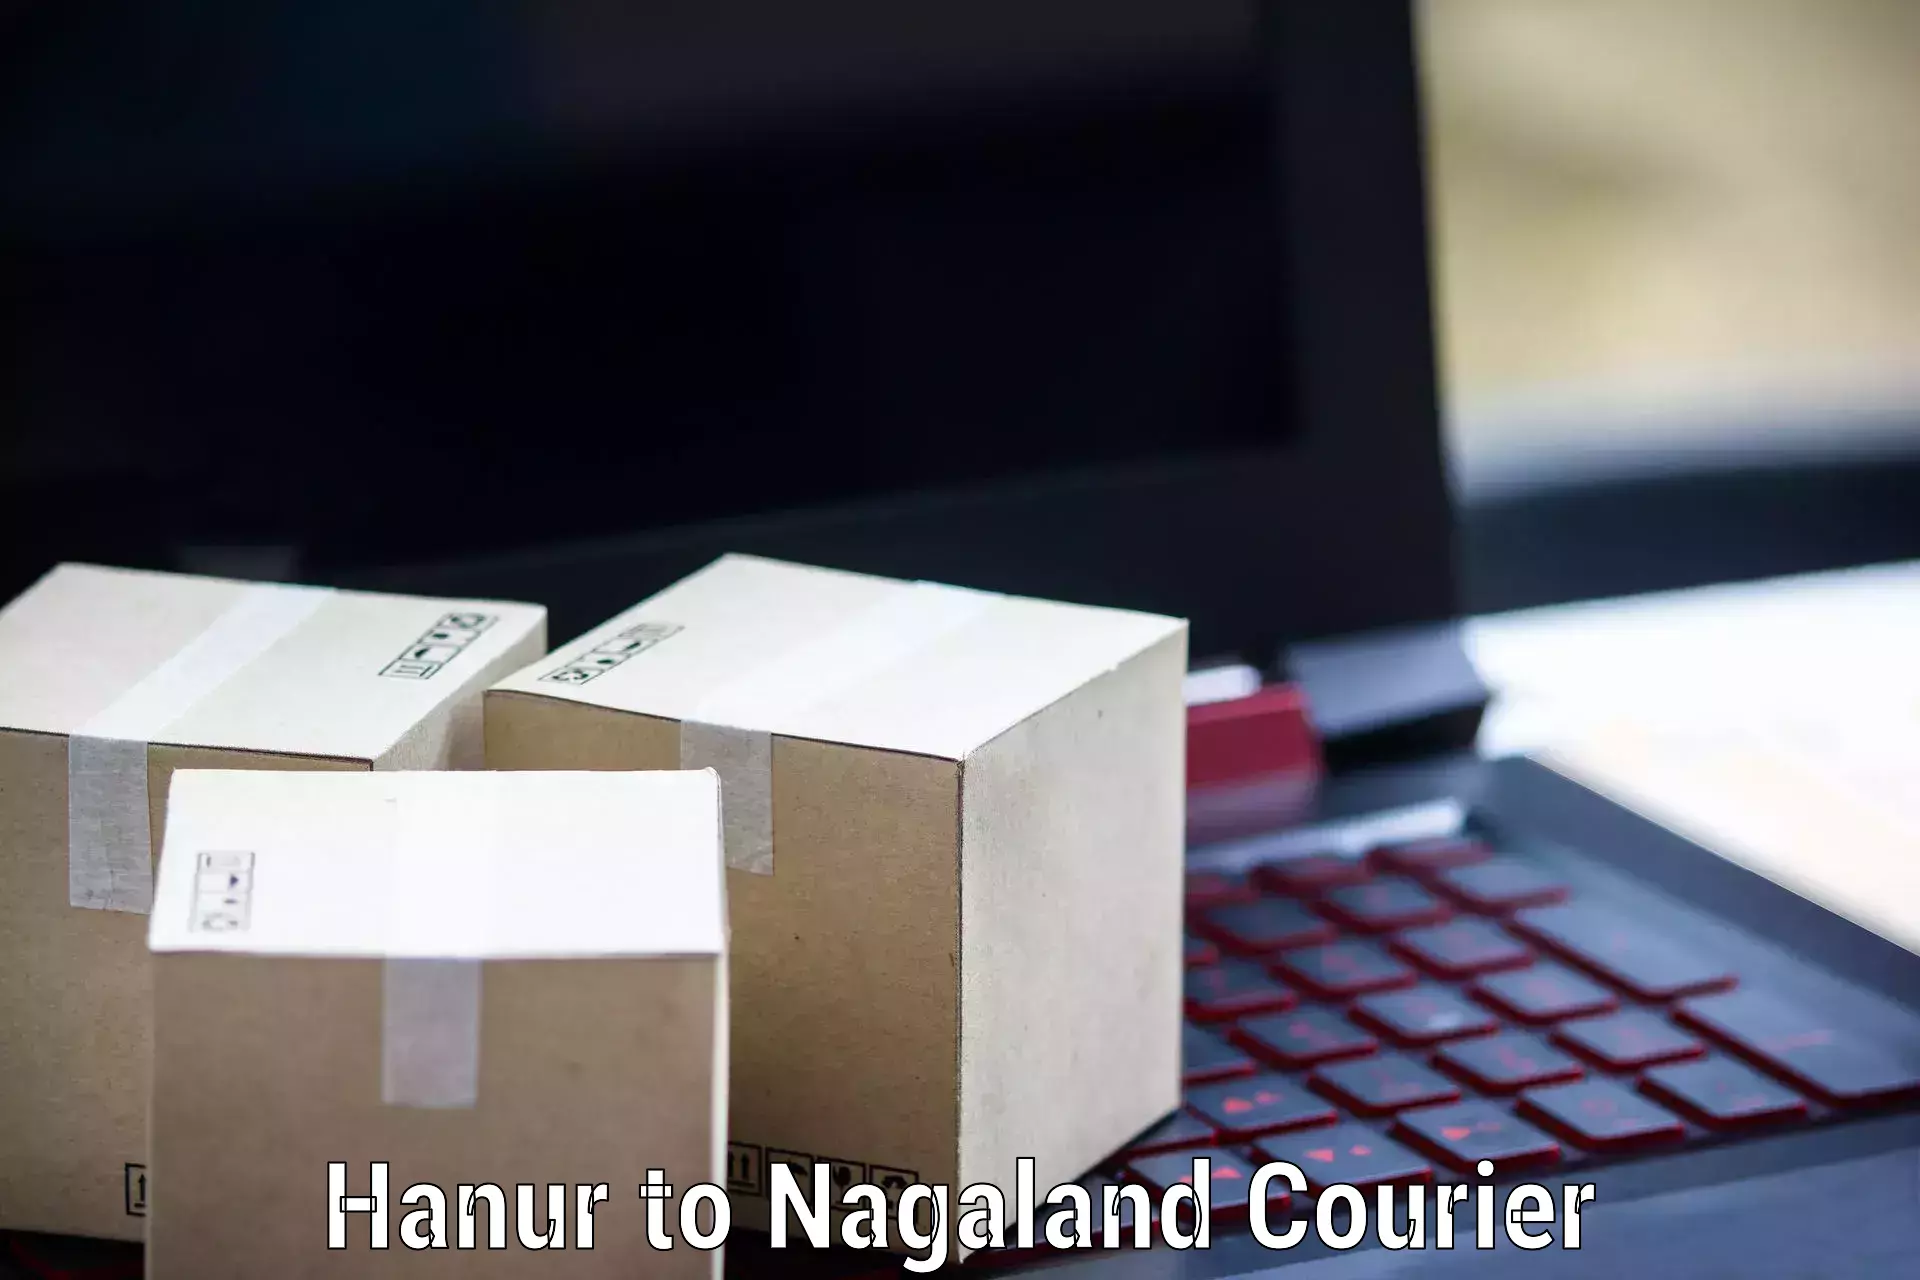 Easy return solutions in Hanur to Nagaland